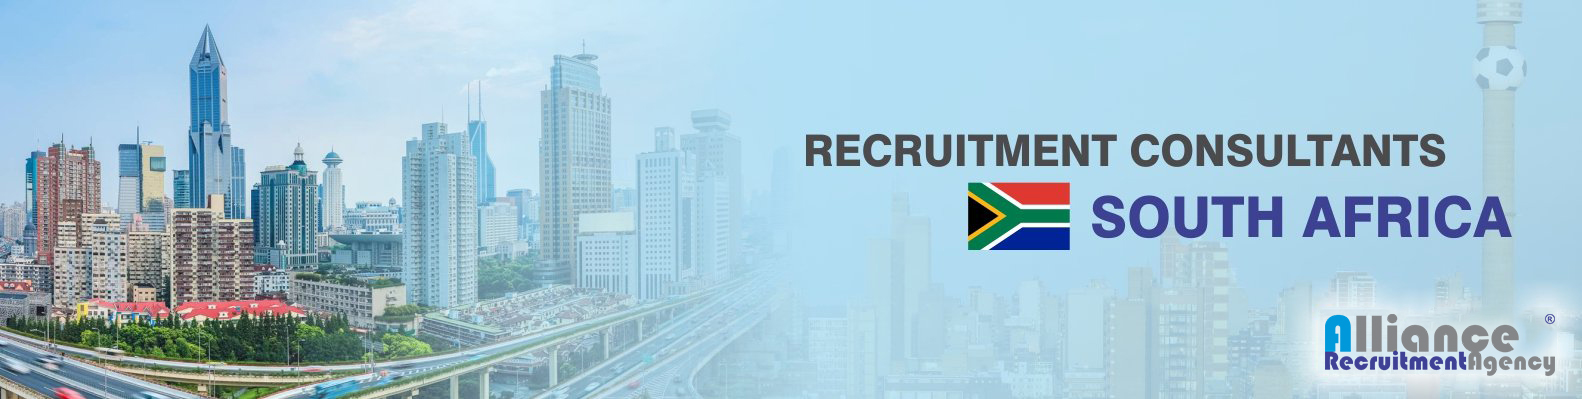 recruitment consultants in south africa